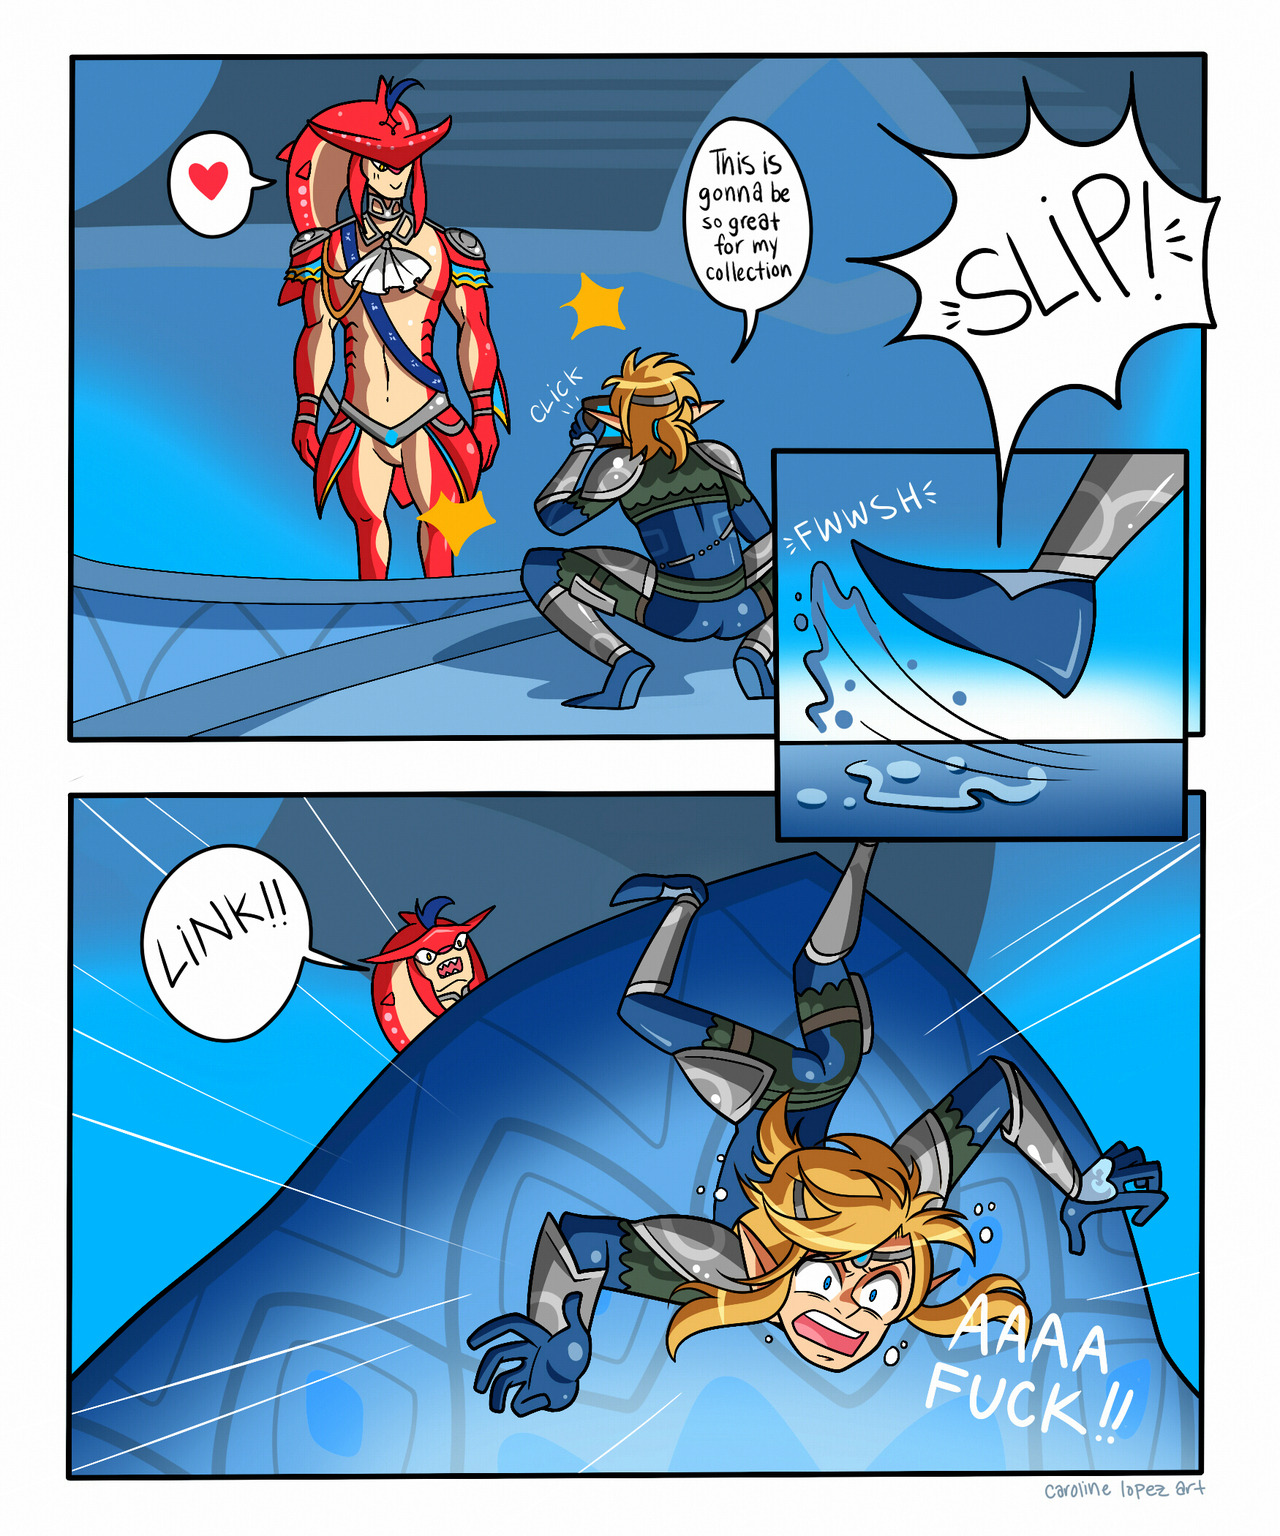 carolinescommissions: Caution: Zora’s Domain is slippery af   lol XD